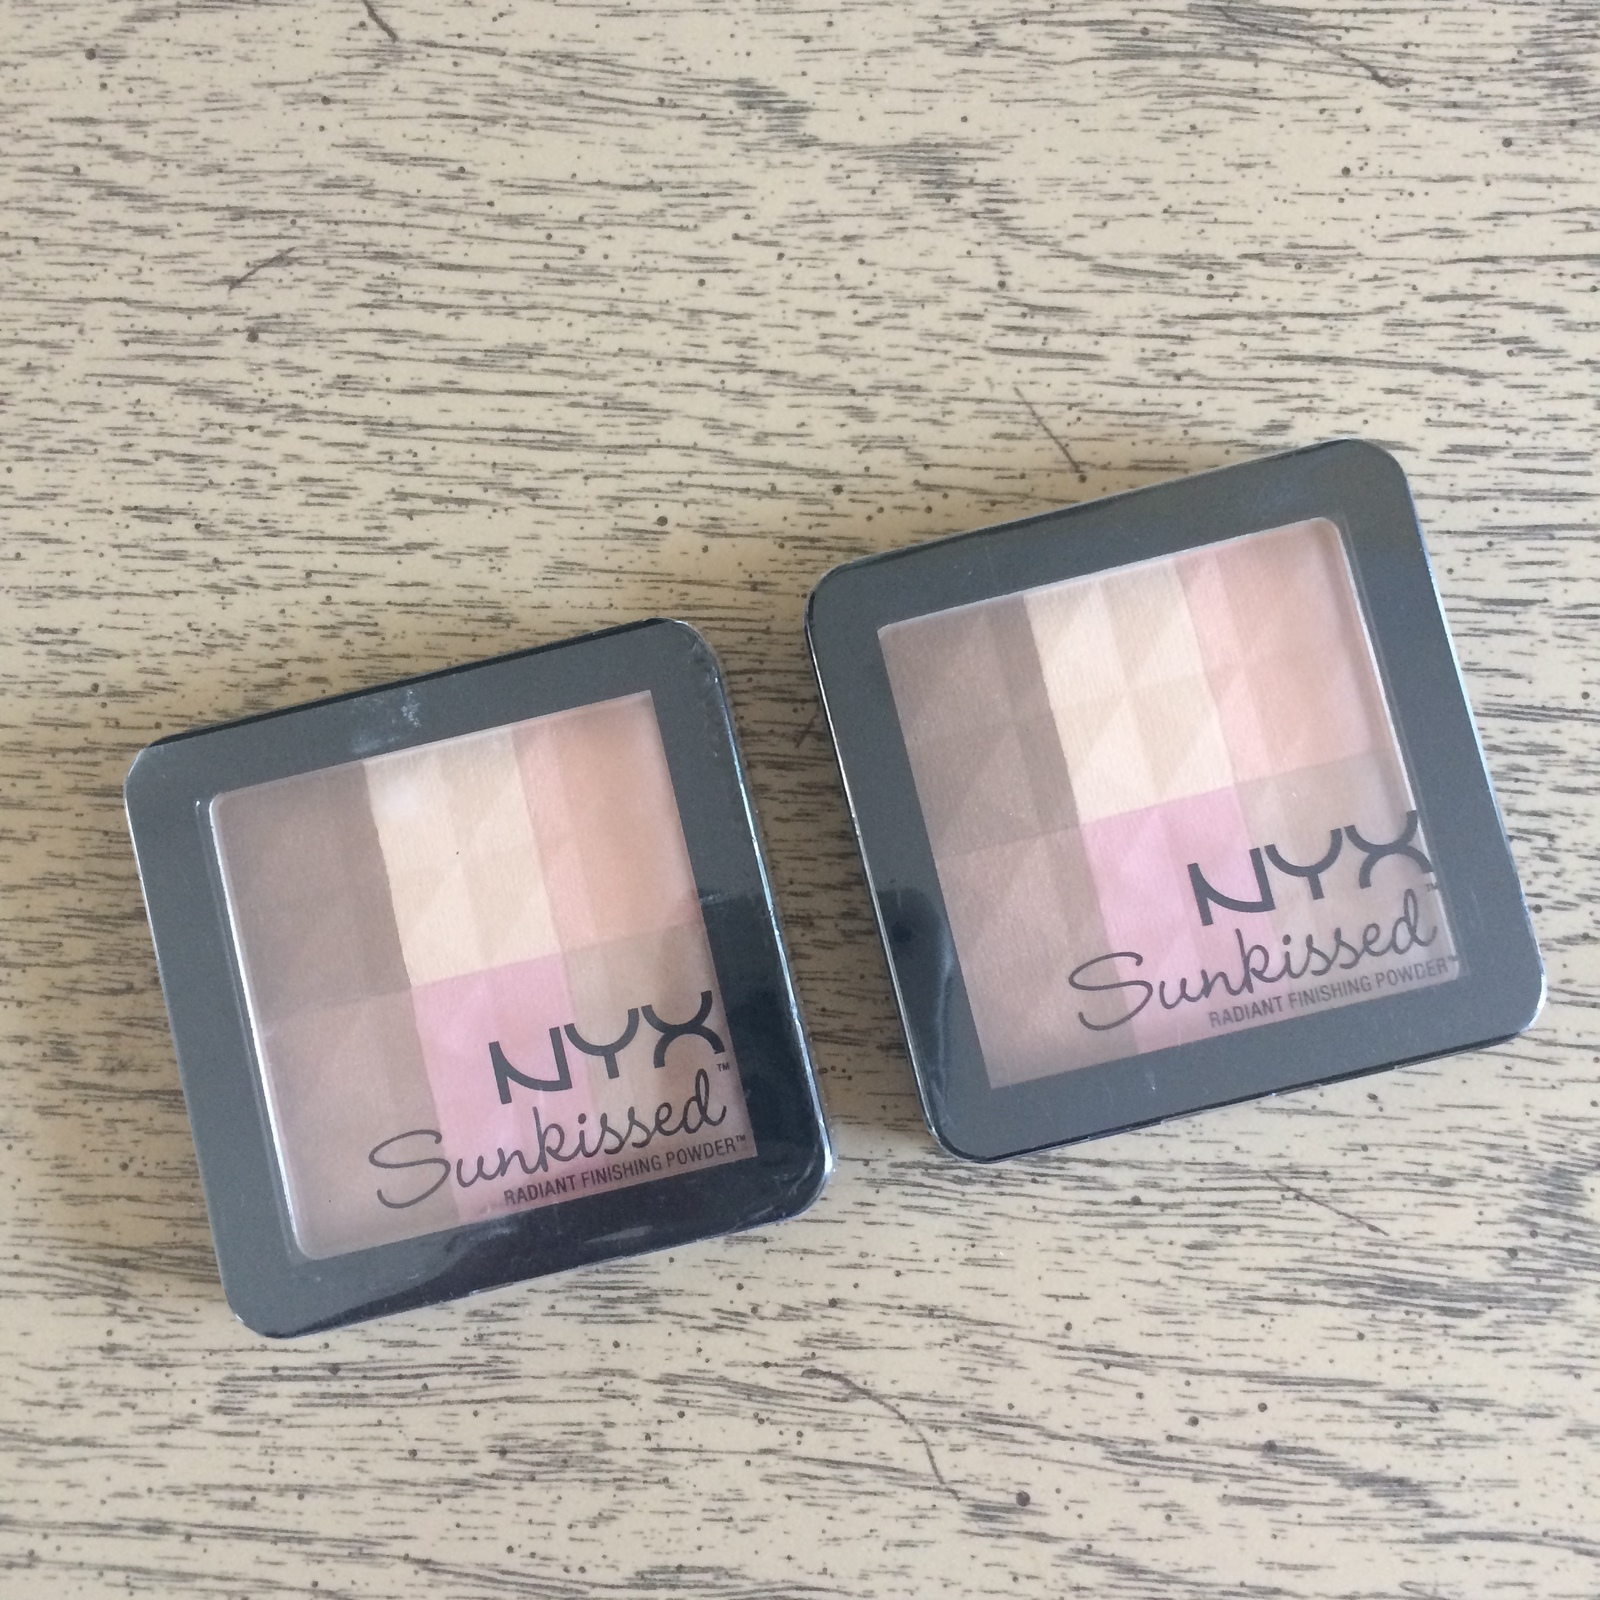 Primary image for 2 x NYX Sunkissed Radiant Finishing Powder  - .43 oz    NEW  Color: RFP02 SUNKIS